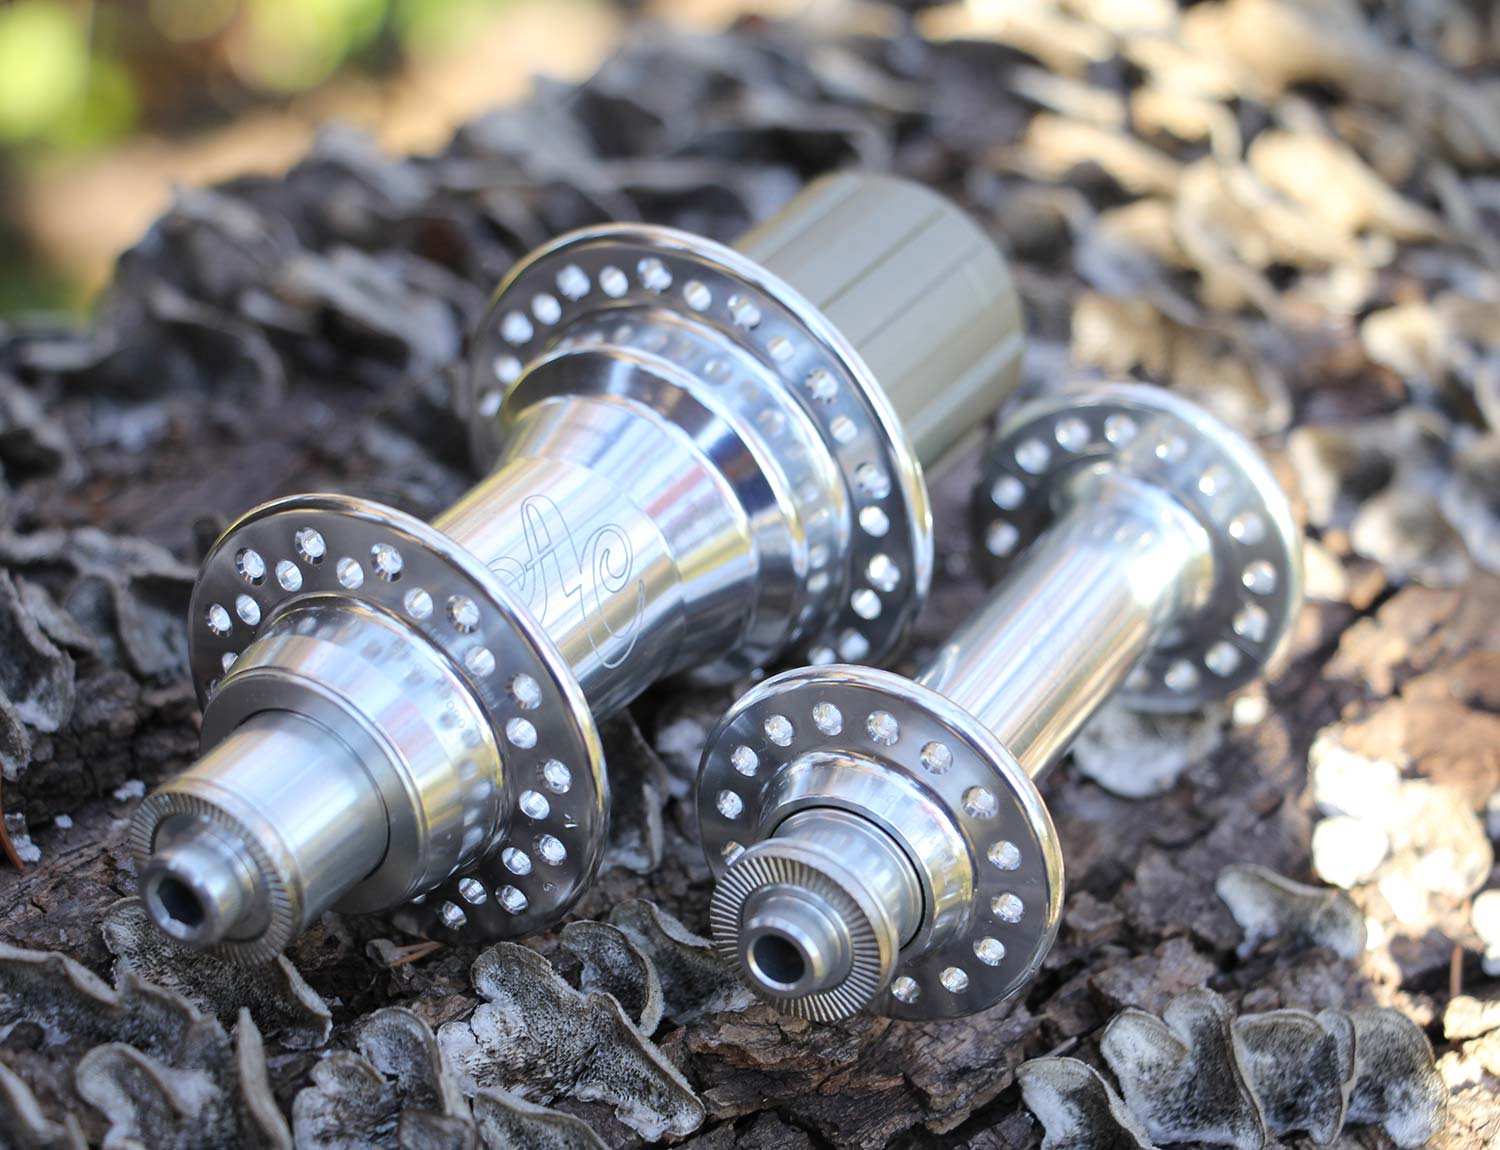 Two polished silver All-City Go-Devil Rear Rim Brake Hubs on outdoor rock 